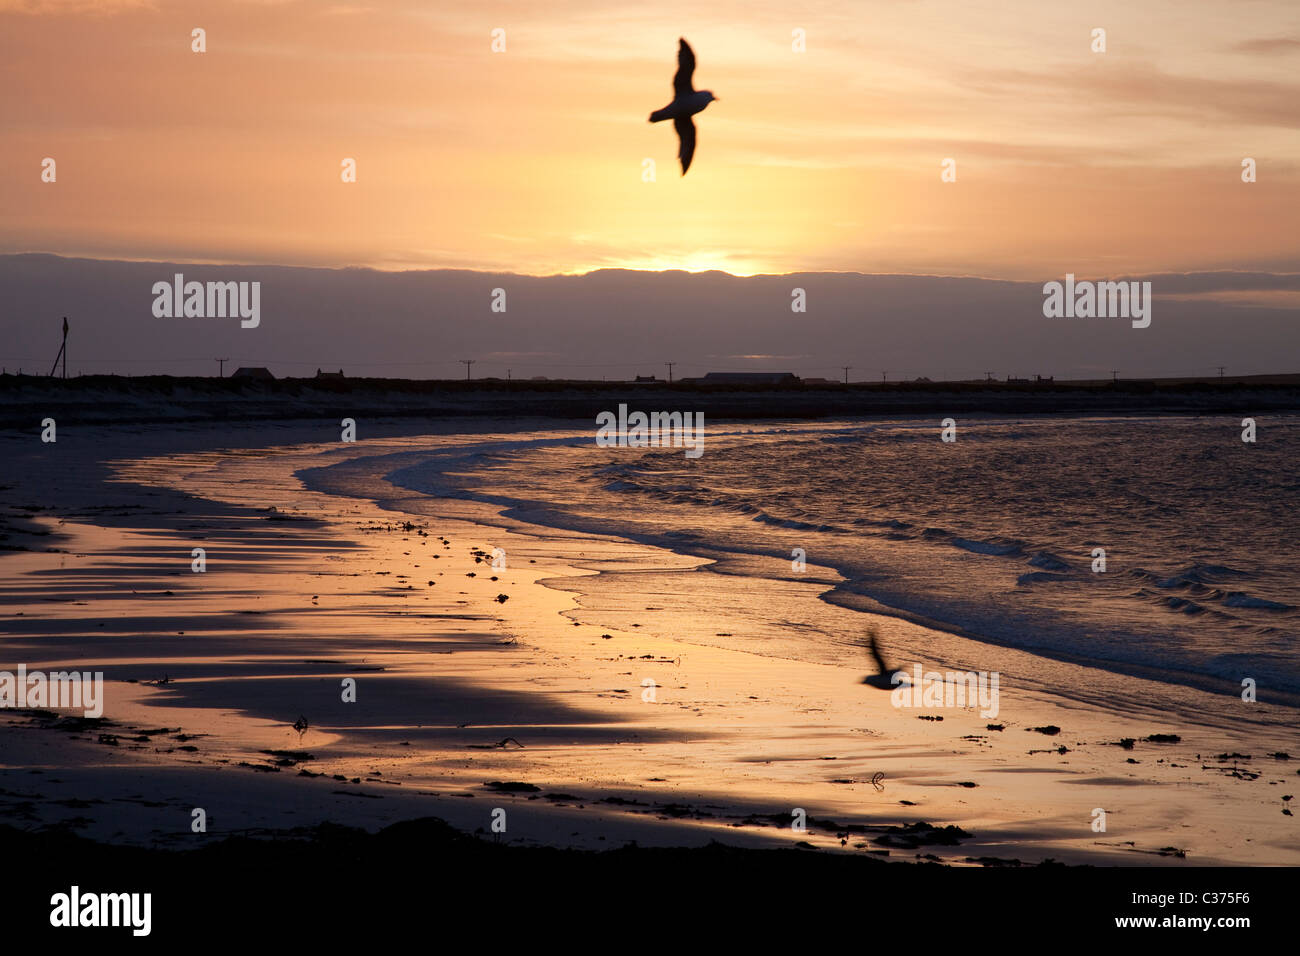 Sunset over the Bay of Sandquoy, Sanday, Orkney Islands Stock Photo